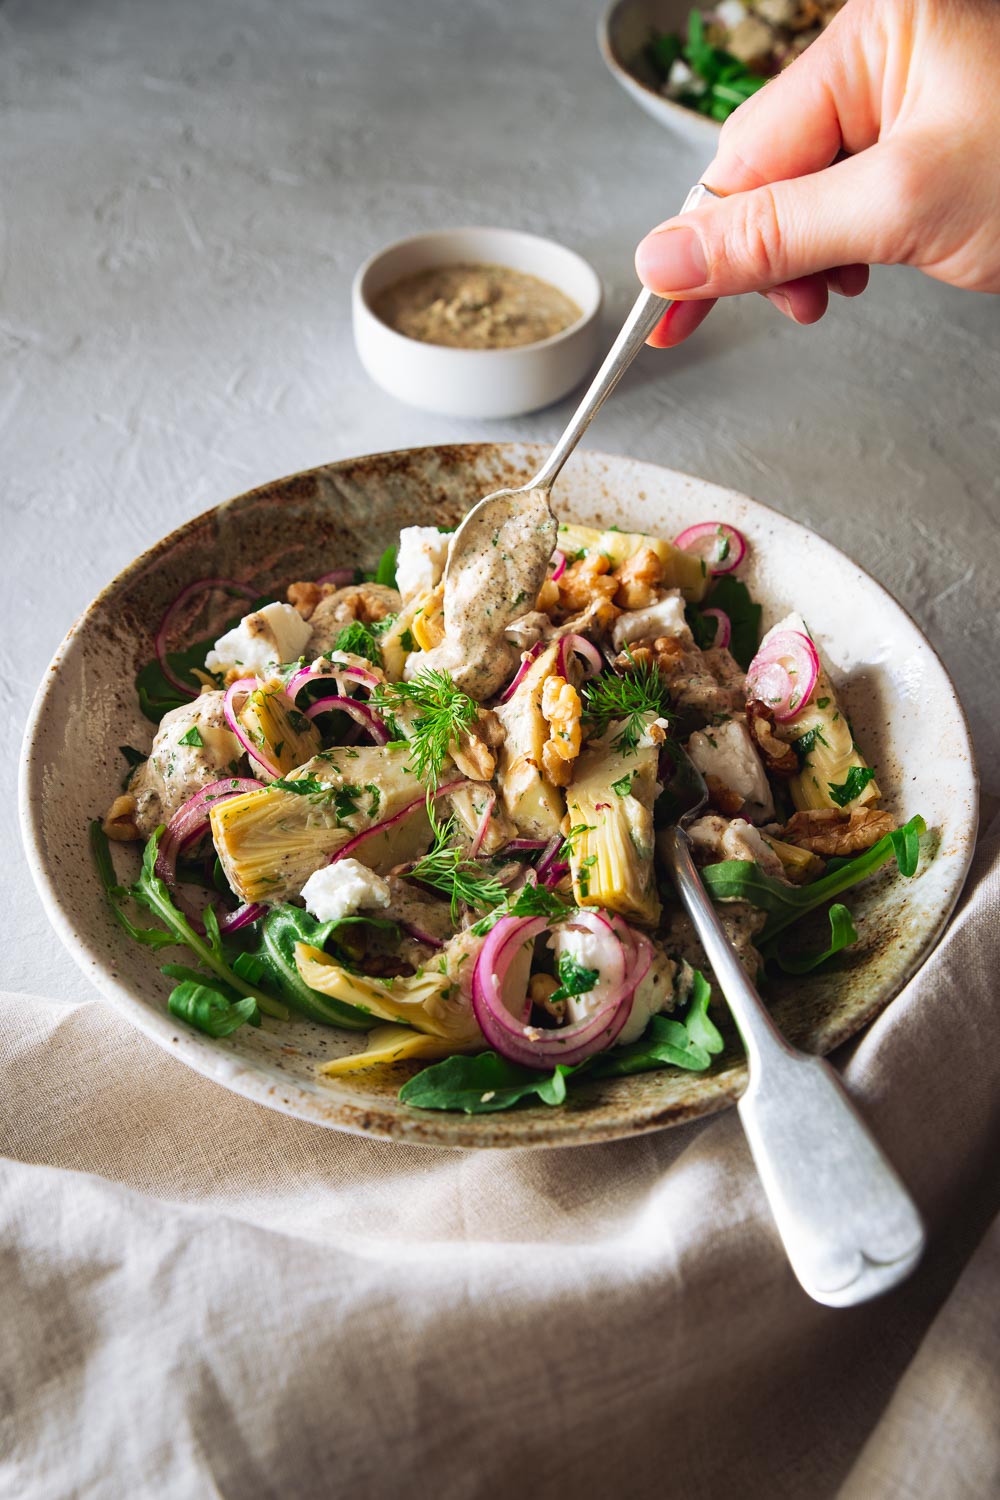 A hand drizzling yoghurt dressing over an artichoke salad in a salad bowl.